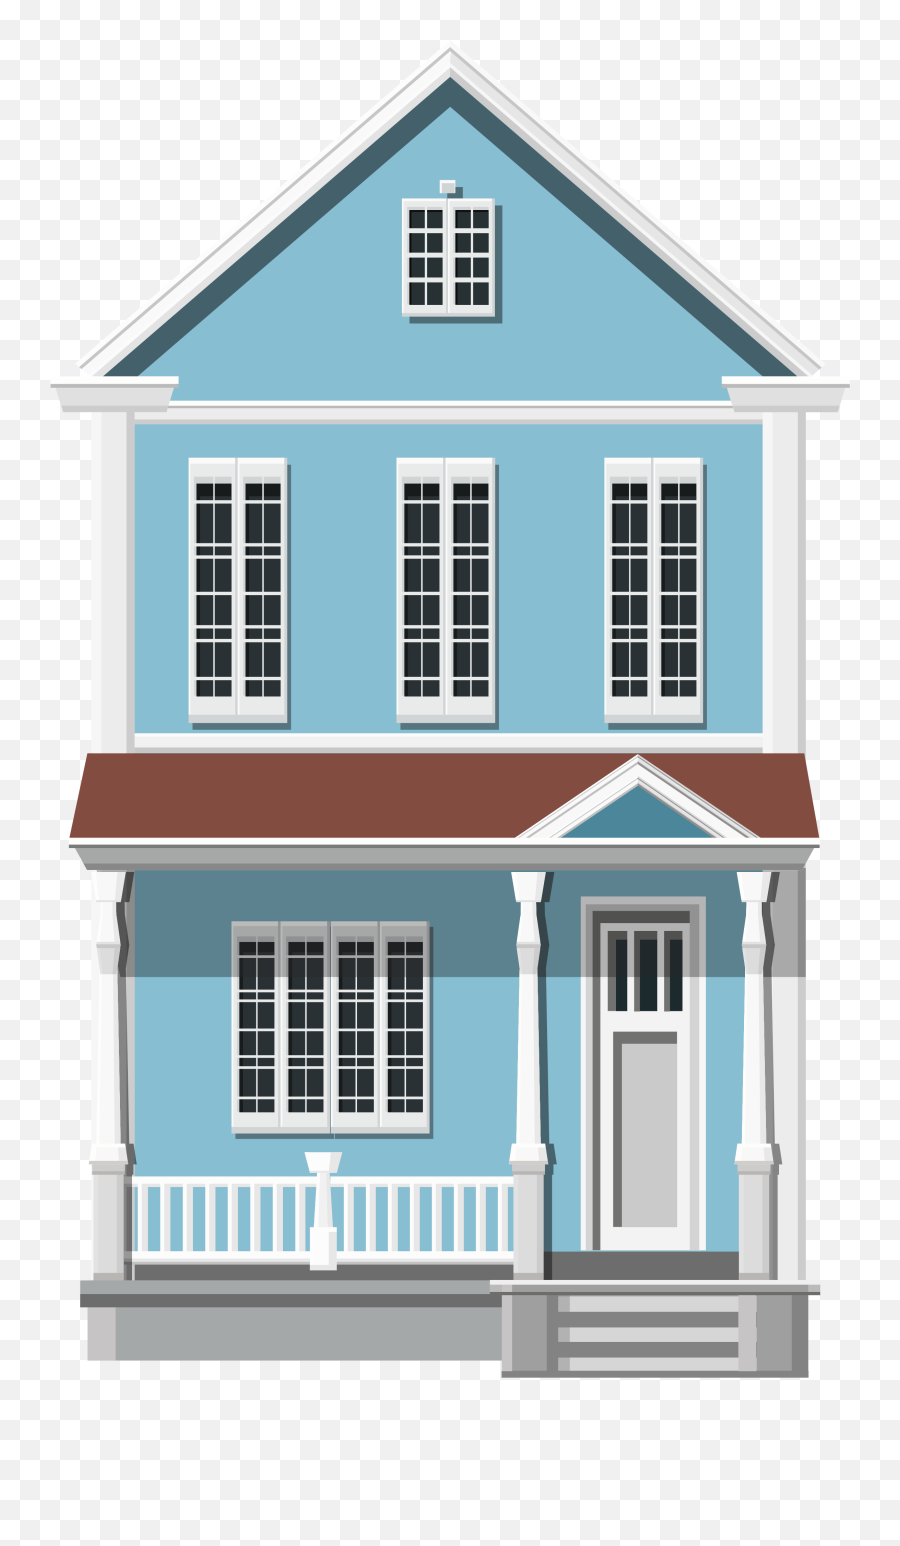 Library Of House Jpg Black And White Stock Blue Png Files - House Png Clipart,House Clipart Transparent